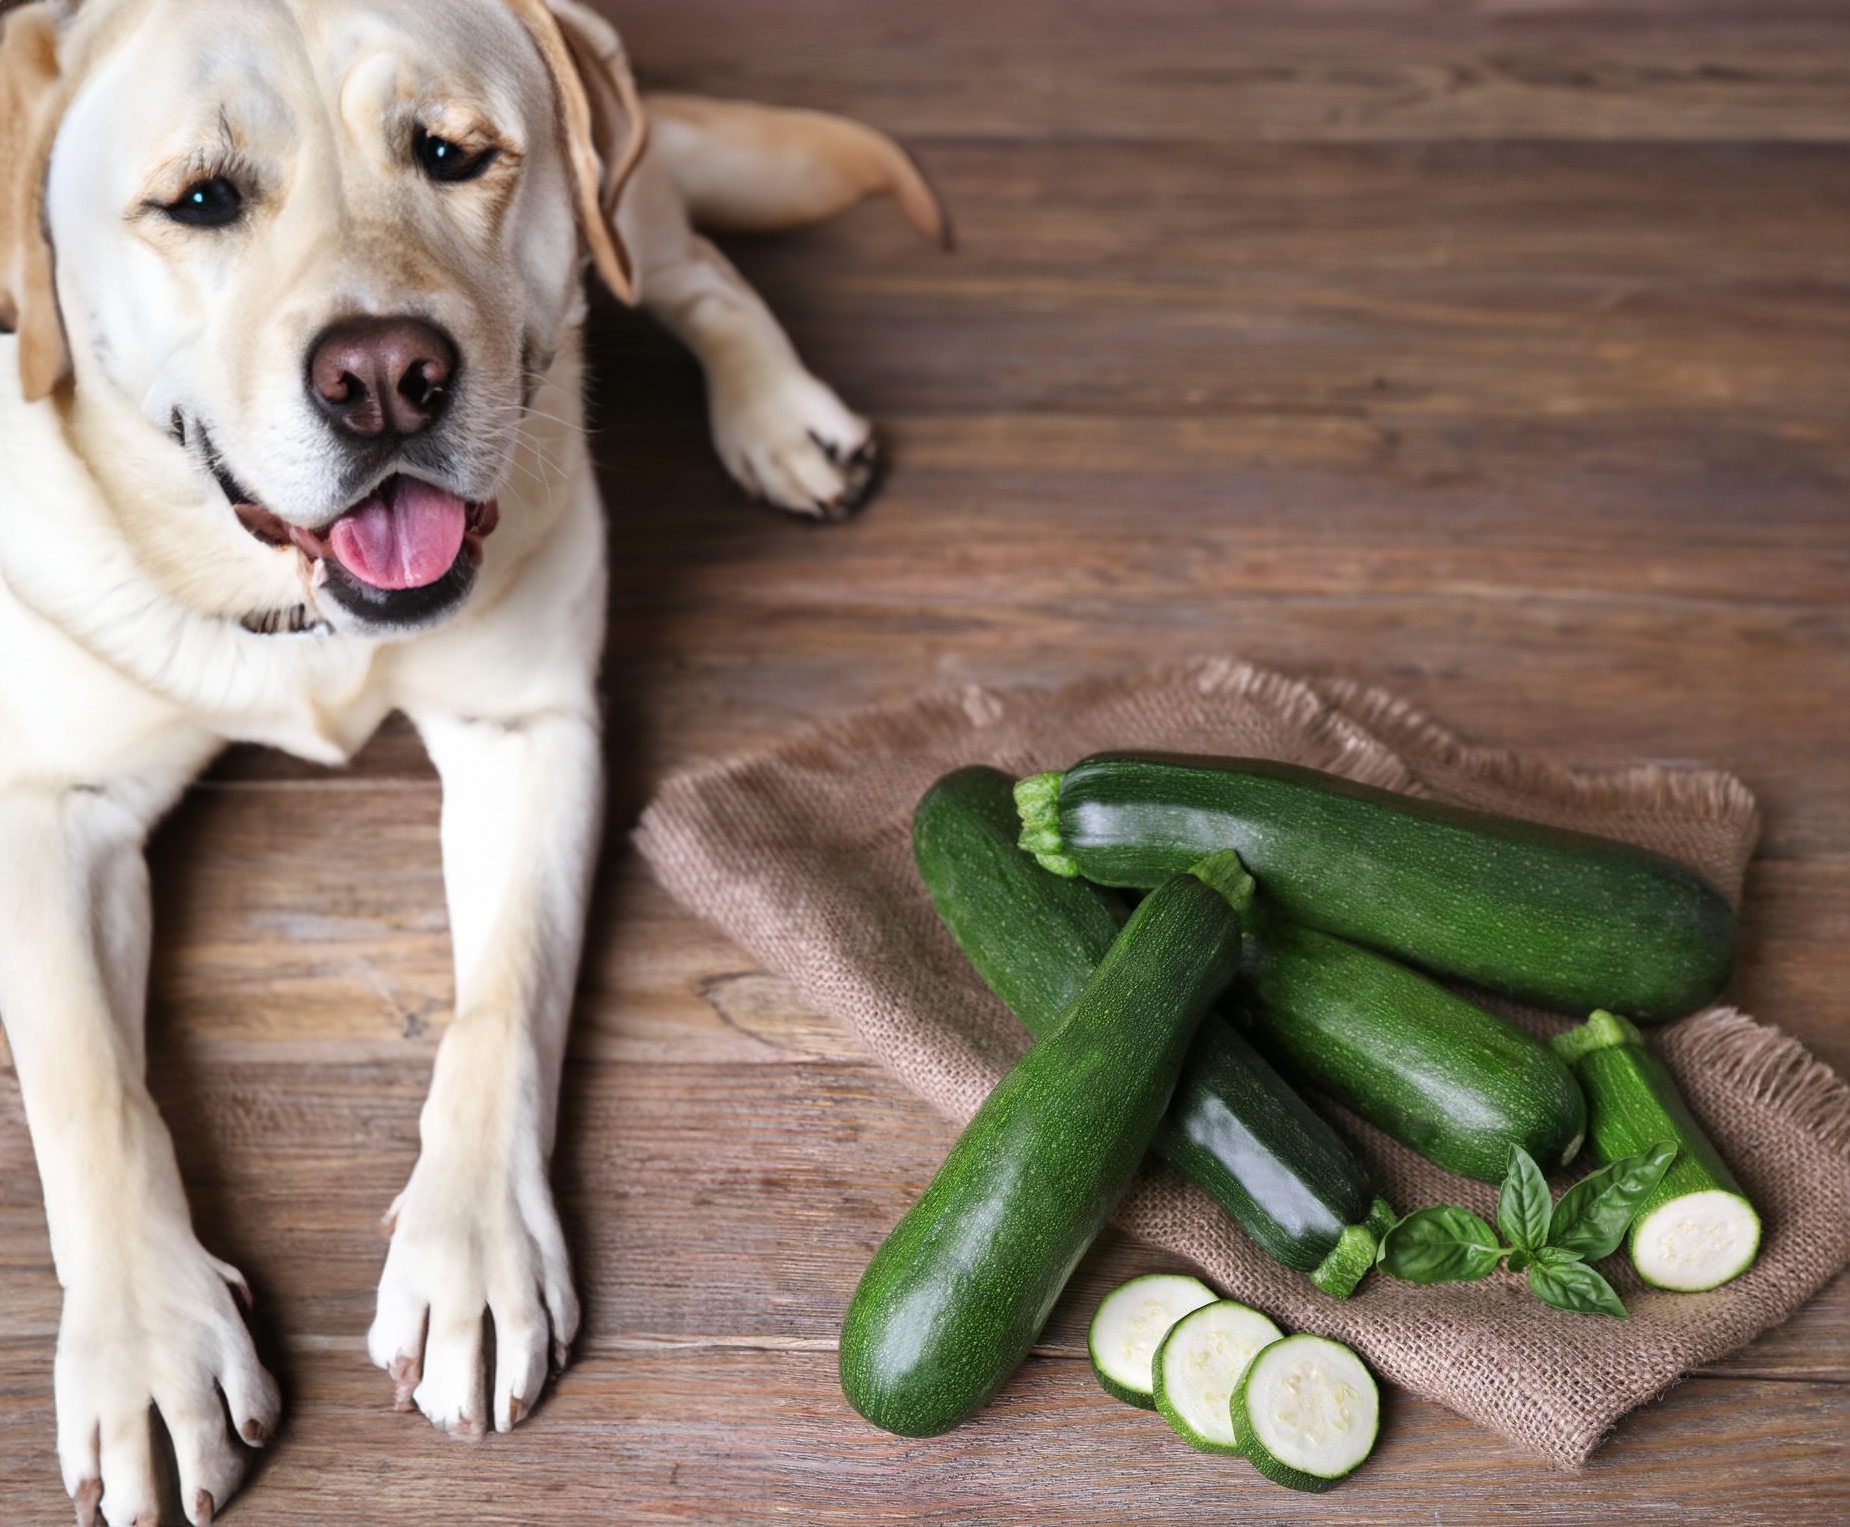 Can Dogs Eat Zucchini?